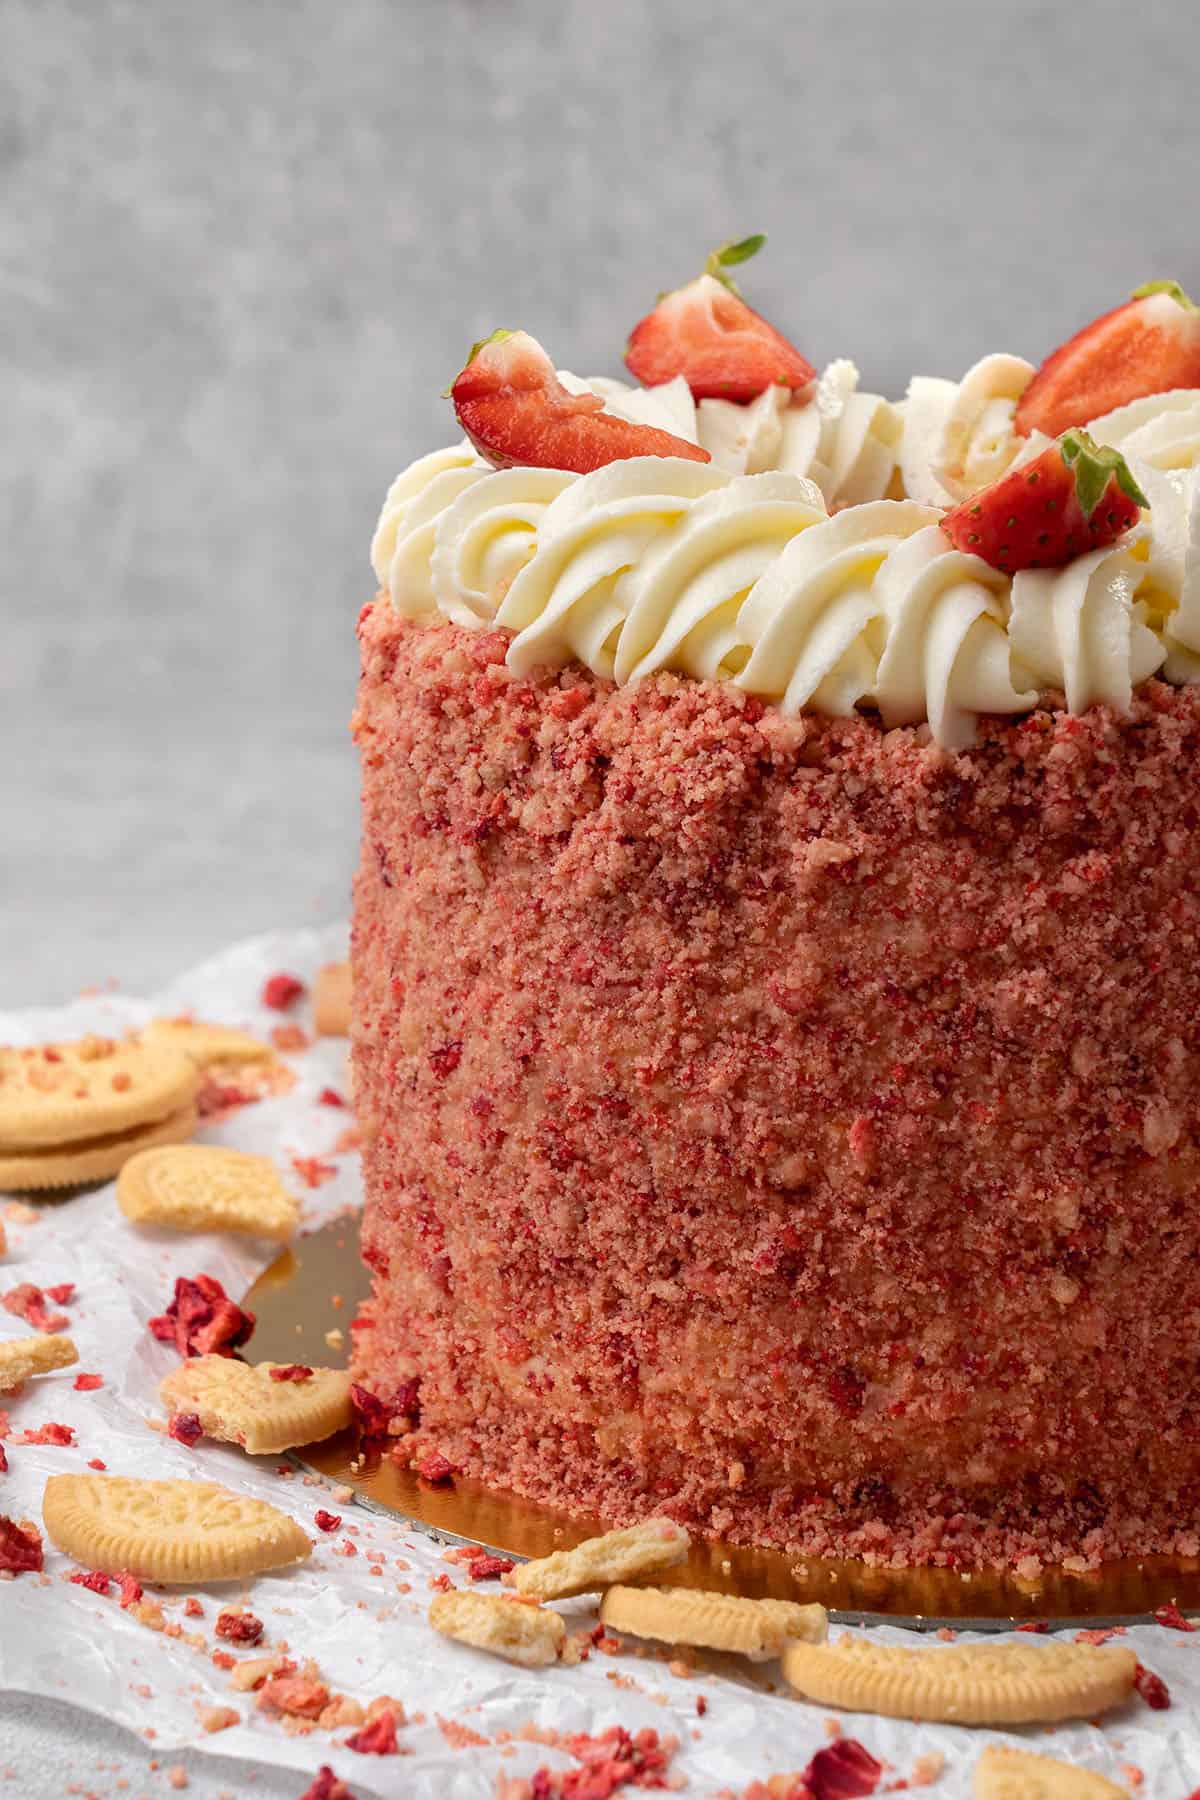 Strawberry crunch cake decorated with fresh strawberries.